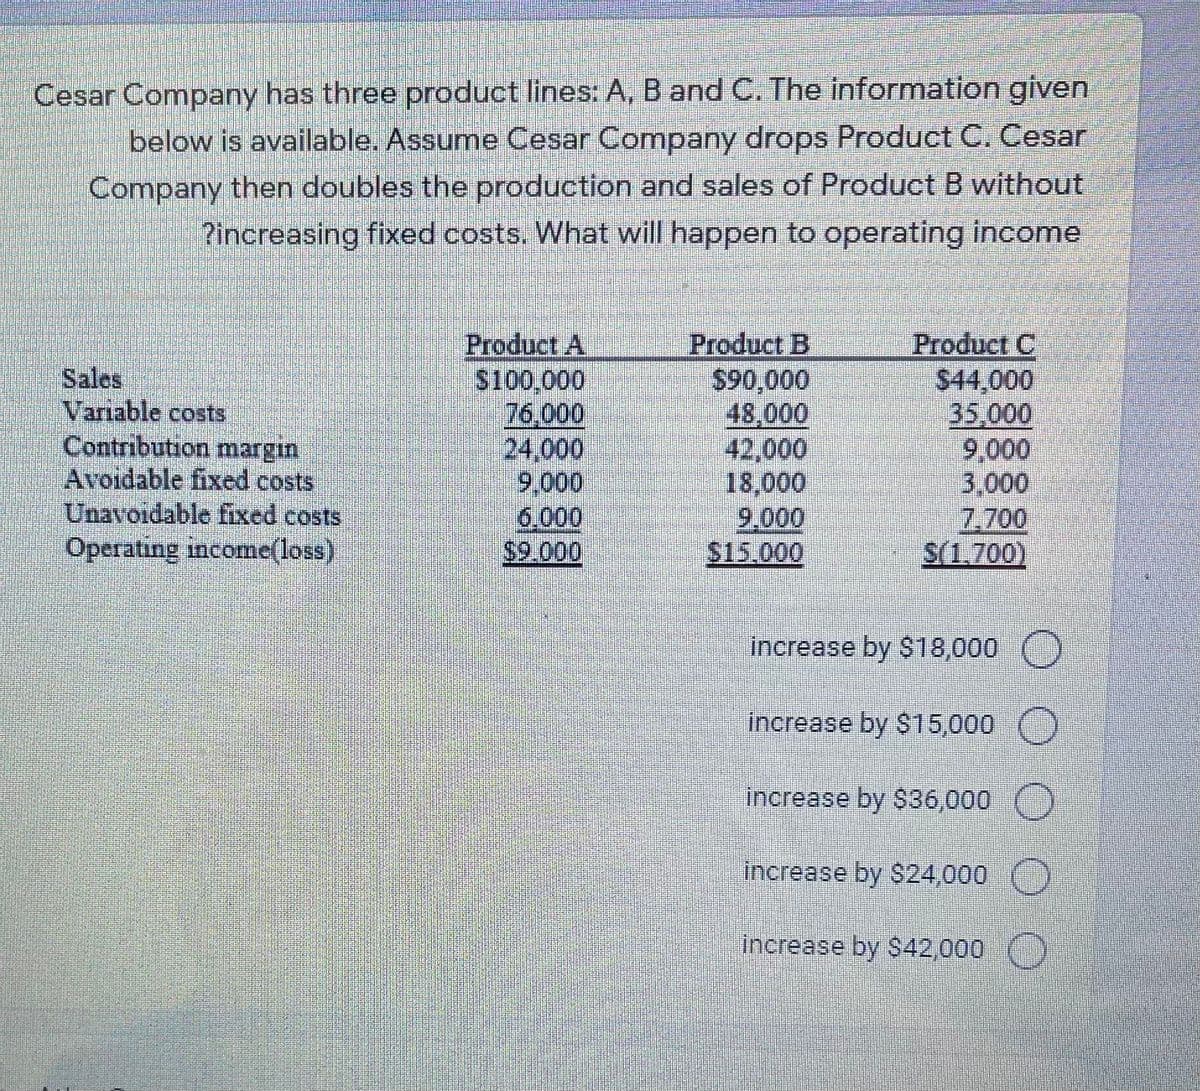 Cesar Company has three product lines: A, B and C. The information given
below is available. Assume Cesar Company drops Product C. Cesar
Company then doubles the production and sales of Product B without
?increasing fixed costs. What will happen to operating income
Sales
Variable costs
Contribution margin
Avoidable fixed costs
Unavoidable fixed costs
Operating income(loss)
Product A
S100,000
76,000
24,000
9,000
6.000
$9.000
Product B
$90,000
48,000
42,000
18,000
9,000
$15.000
Product C
$44,000
35,000
9,000
3,000
7.700
S(1,700)
increase by $18,000 O
increase by ST15,000 ()
increase by $36,000
increase by $24,000
increase by $42,000 )
